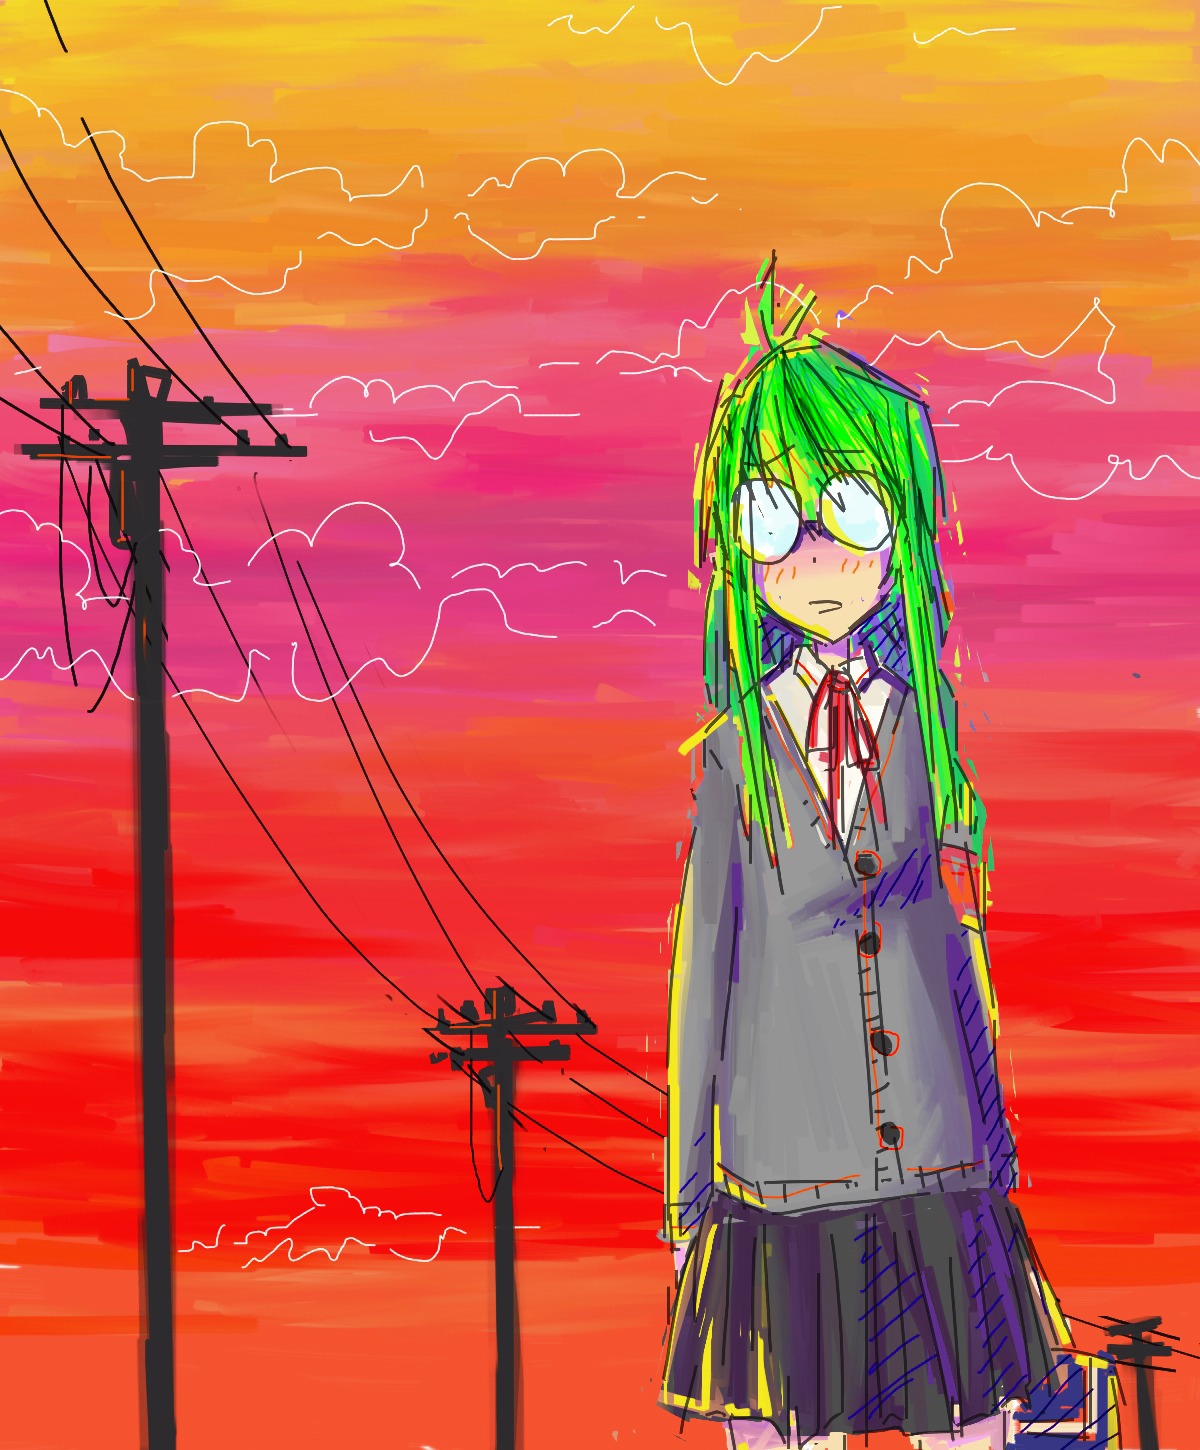 ahoge bomb-chan braid glasses green_hair long_hair main_page outdoors school_uniform skirt sky sunset twin_braids wire wires